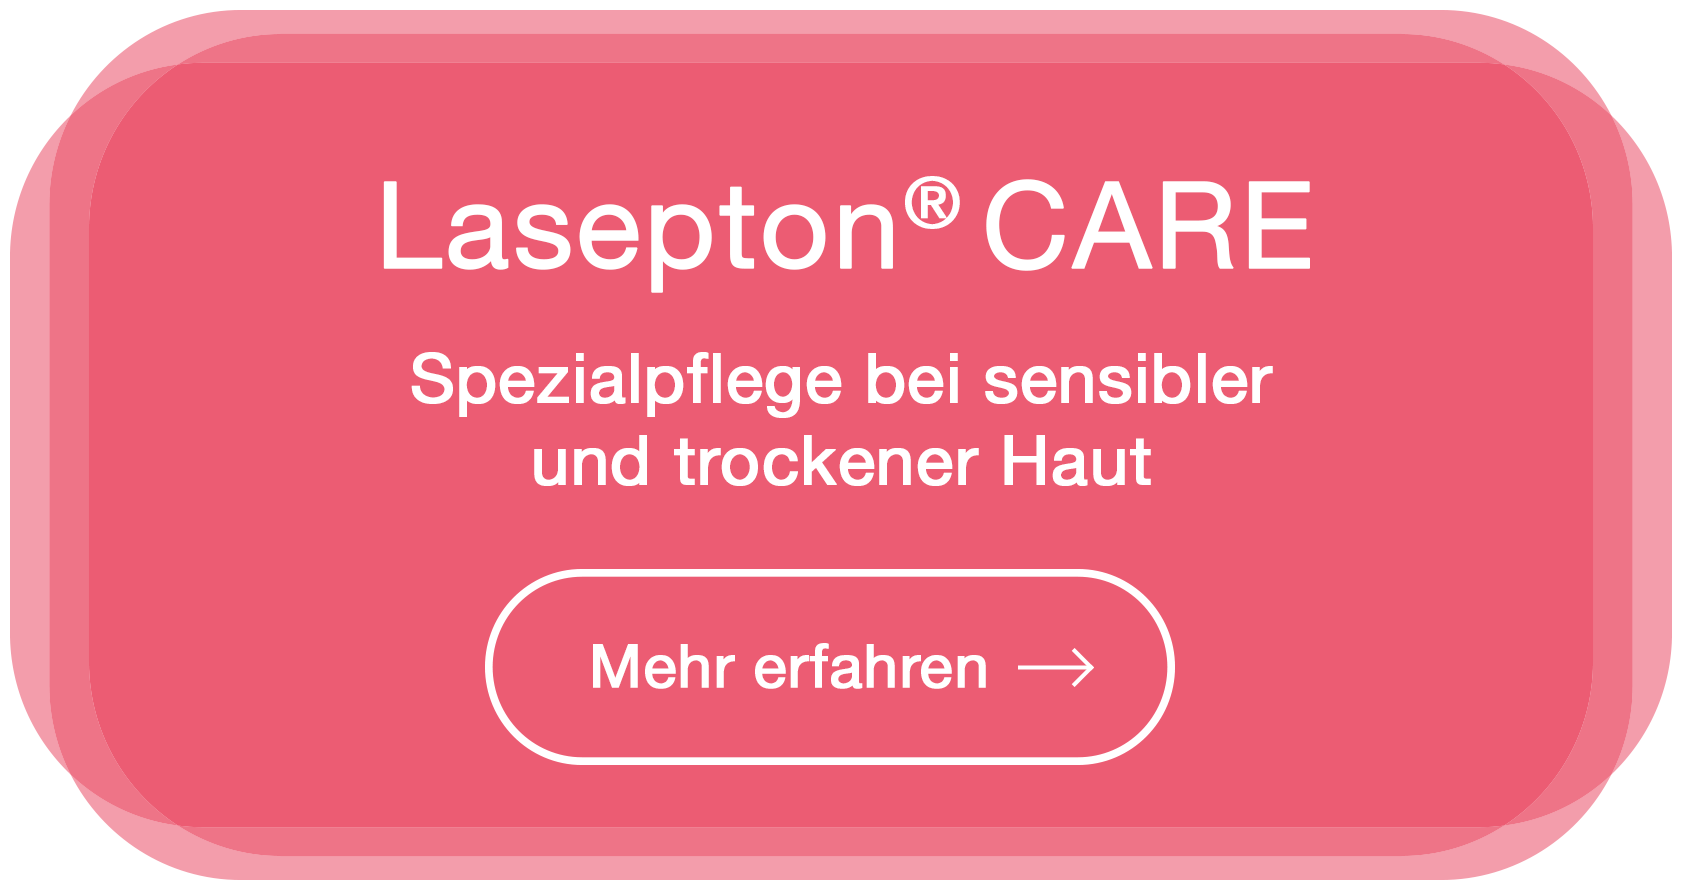 Lasepton CARE